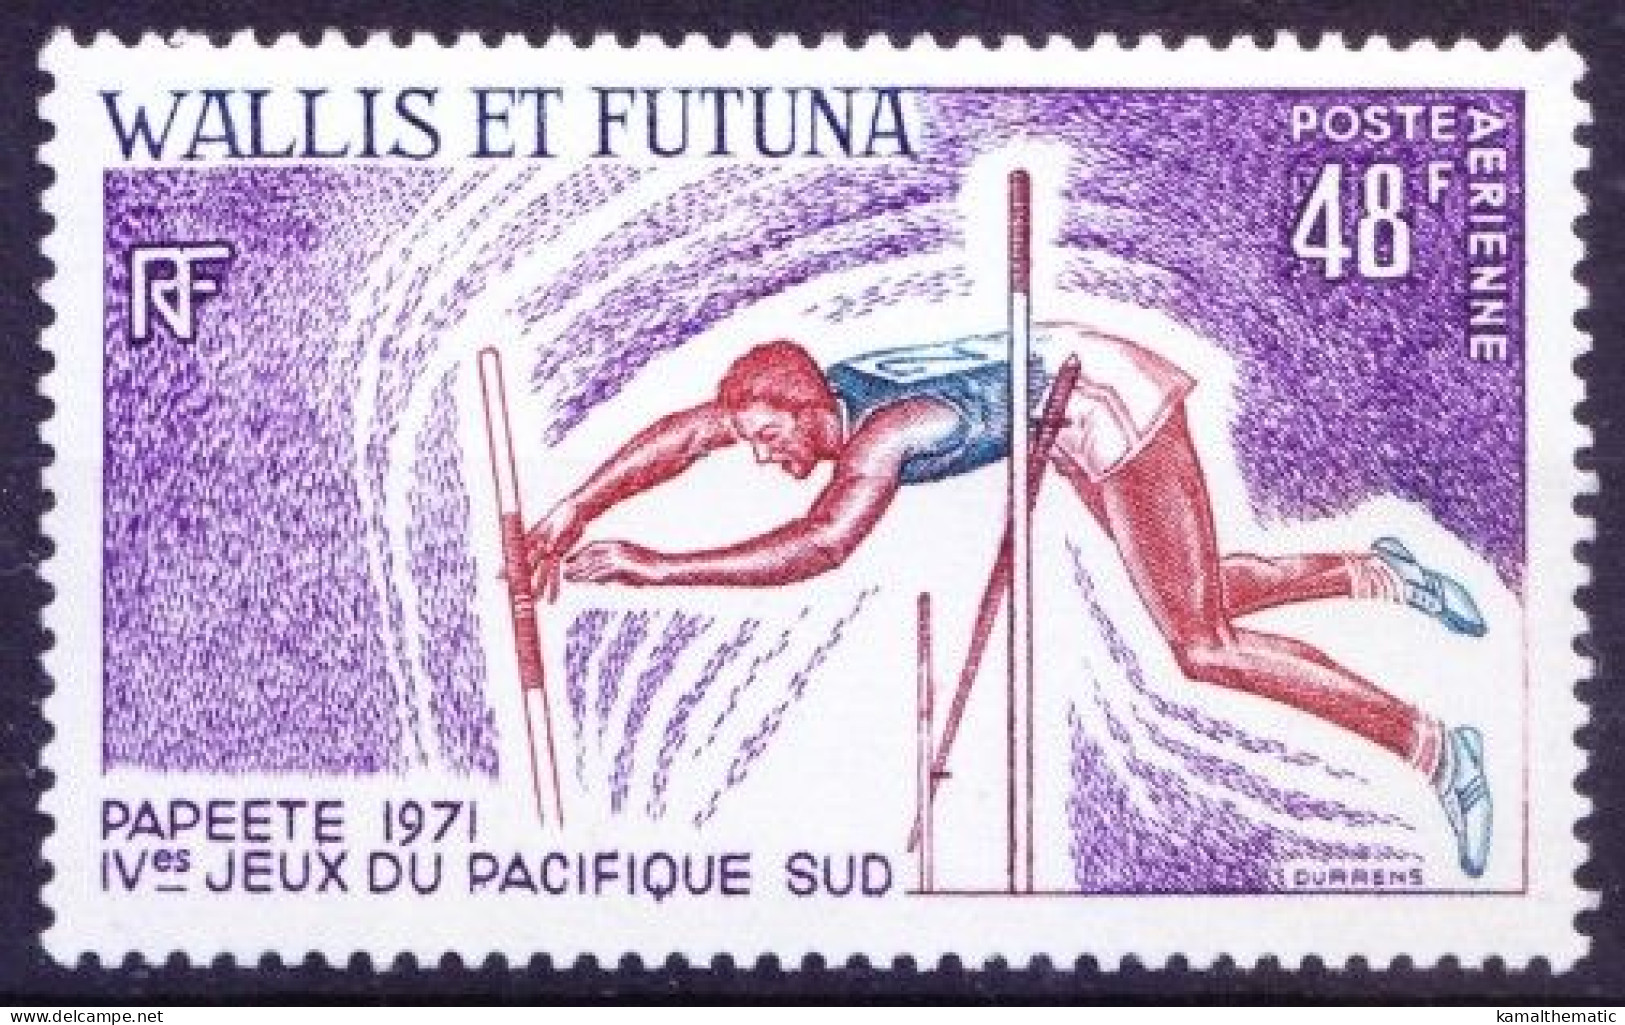 Wallis And Futuna 1971 MNH, Athletics, Pole Vaulting, Sports, 4th South Pacific Games - Athletics